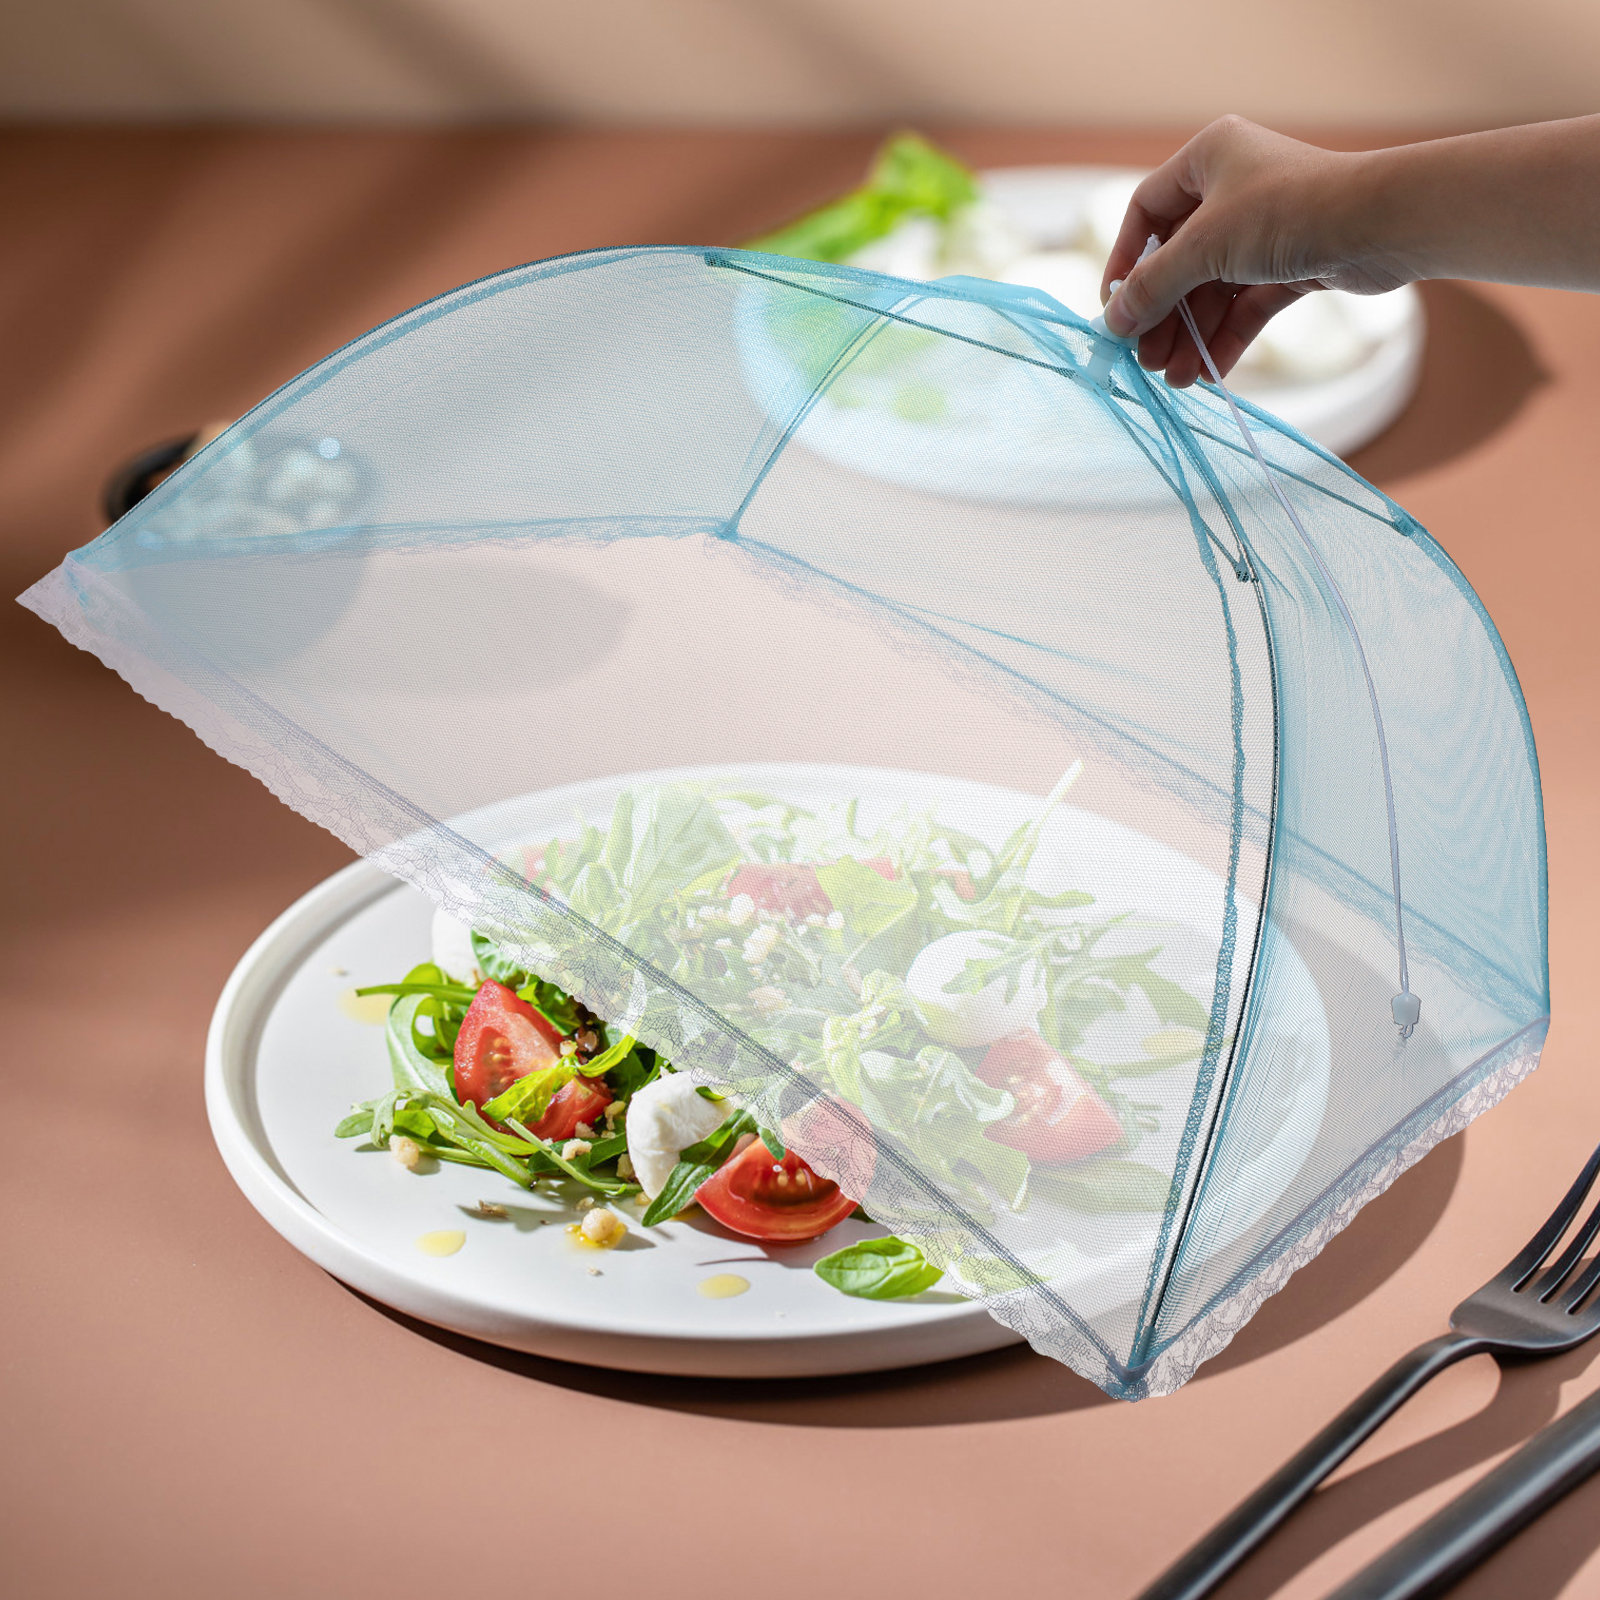 Umbrella Food Cover 6pcs Large Pop-Up Mesh Screen Food Cover Tent Umbrella  Reusable and Collapsible Outdoor Picnic Food Covers Mesh Food Cover Net 